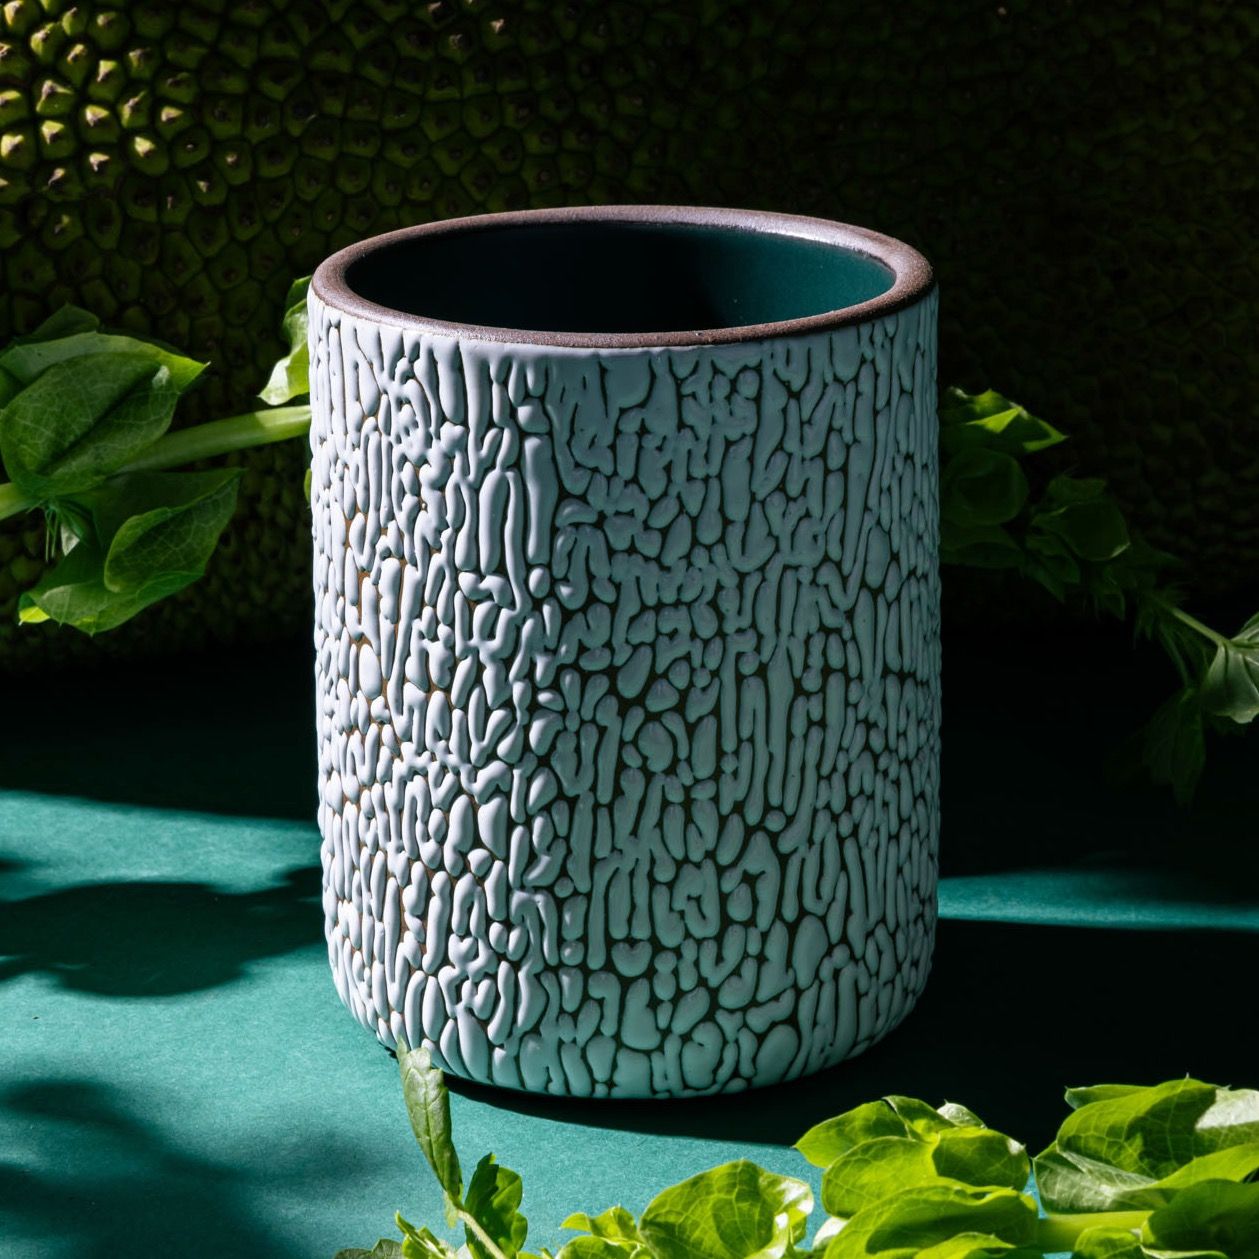 A big white ceramic vessel with cracked texture and the interior being dark teal in a moody studio setting with foliage in the background